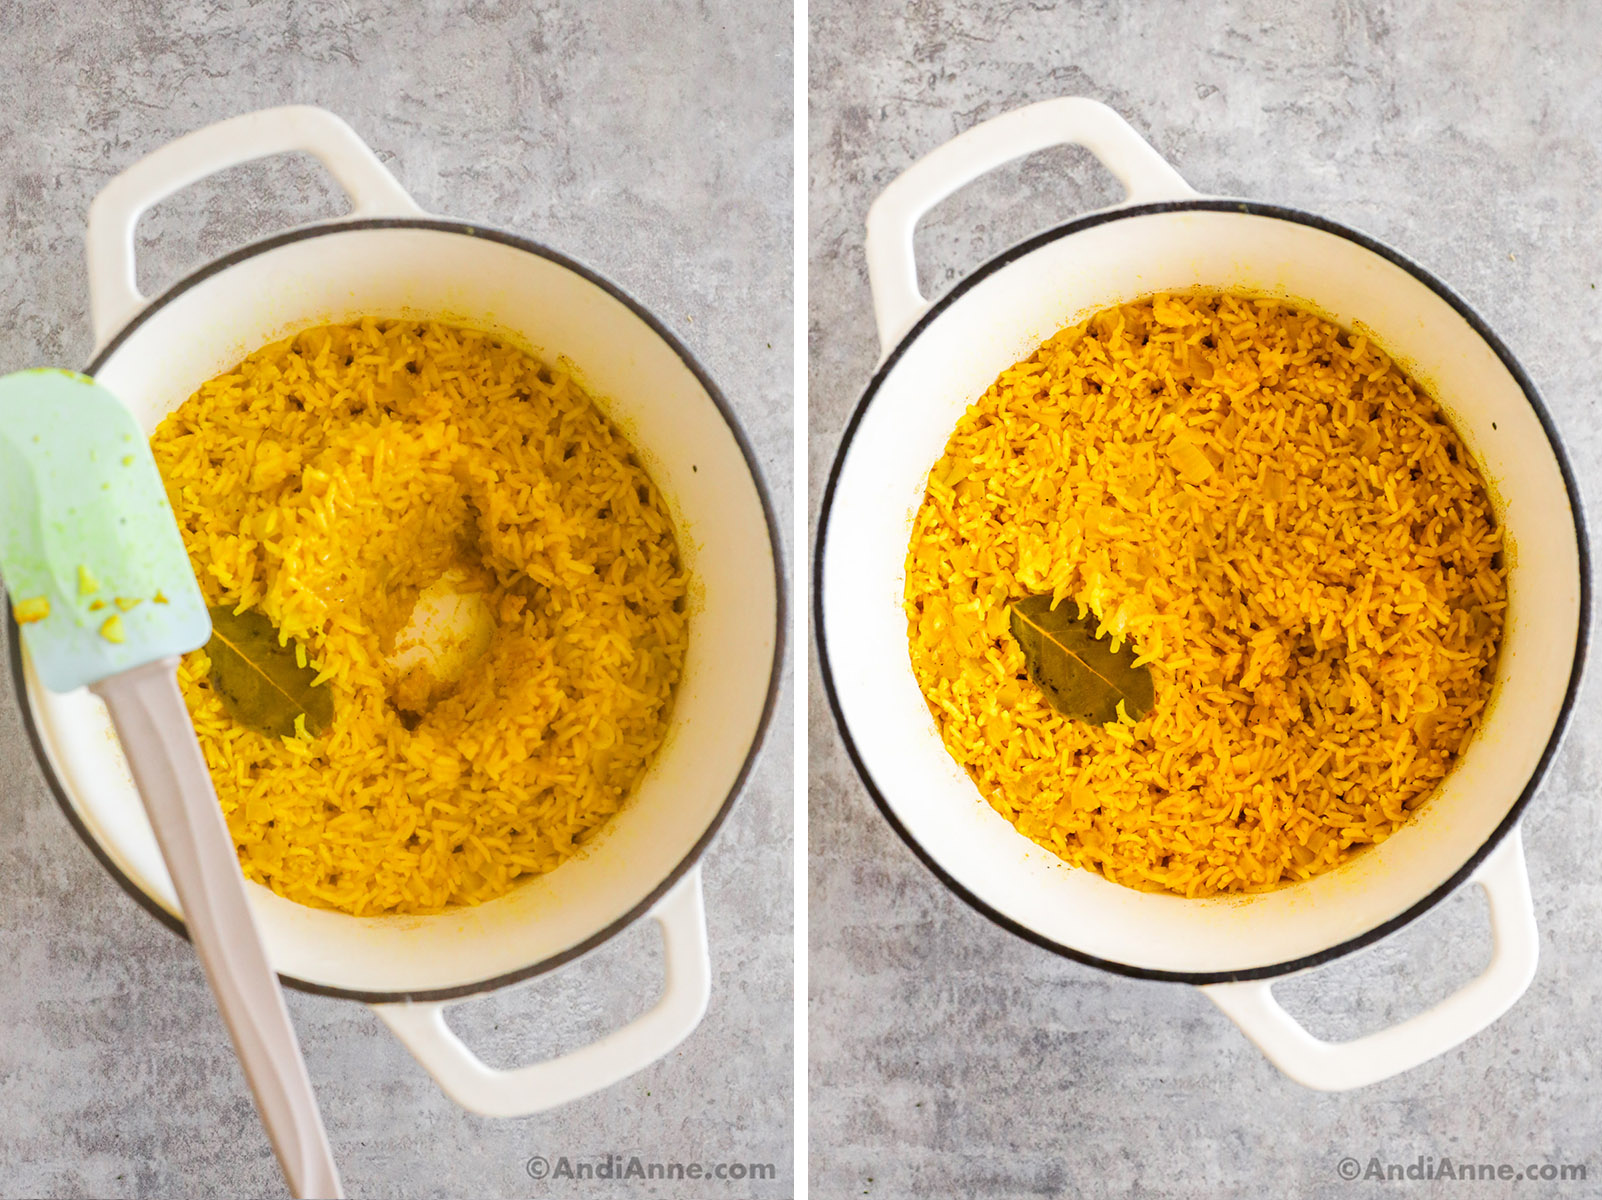 Two images of a white pot with yellow cooked rice, and a bay leaf. Rice is pushed to the side in one spot of the photo.